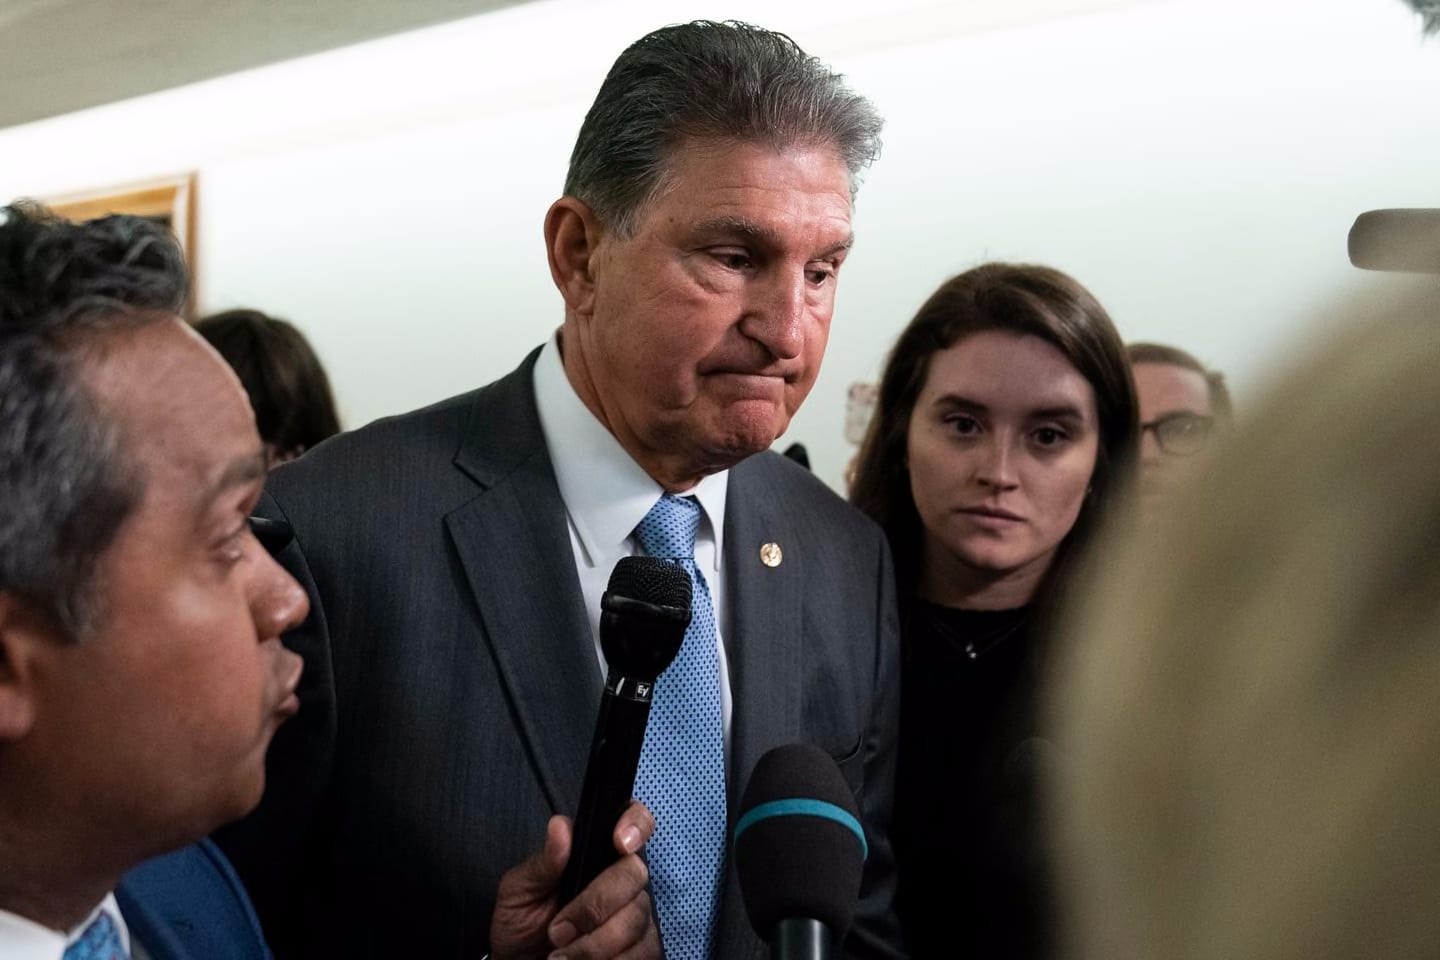 Criticism of Senator Joe Manchin has been particularly pointed from voting rights groups and civil rights leaders.